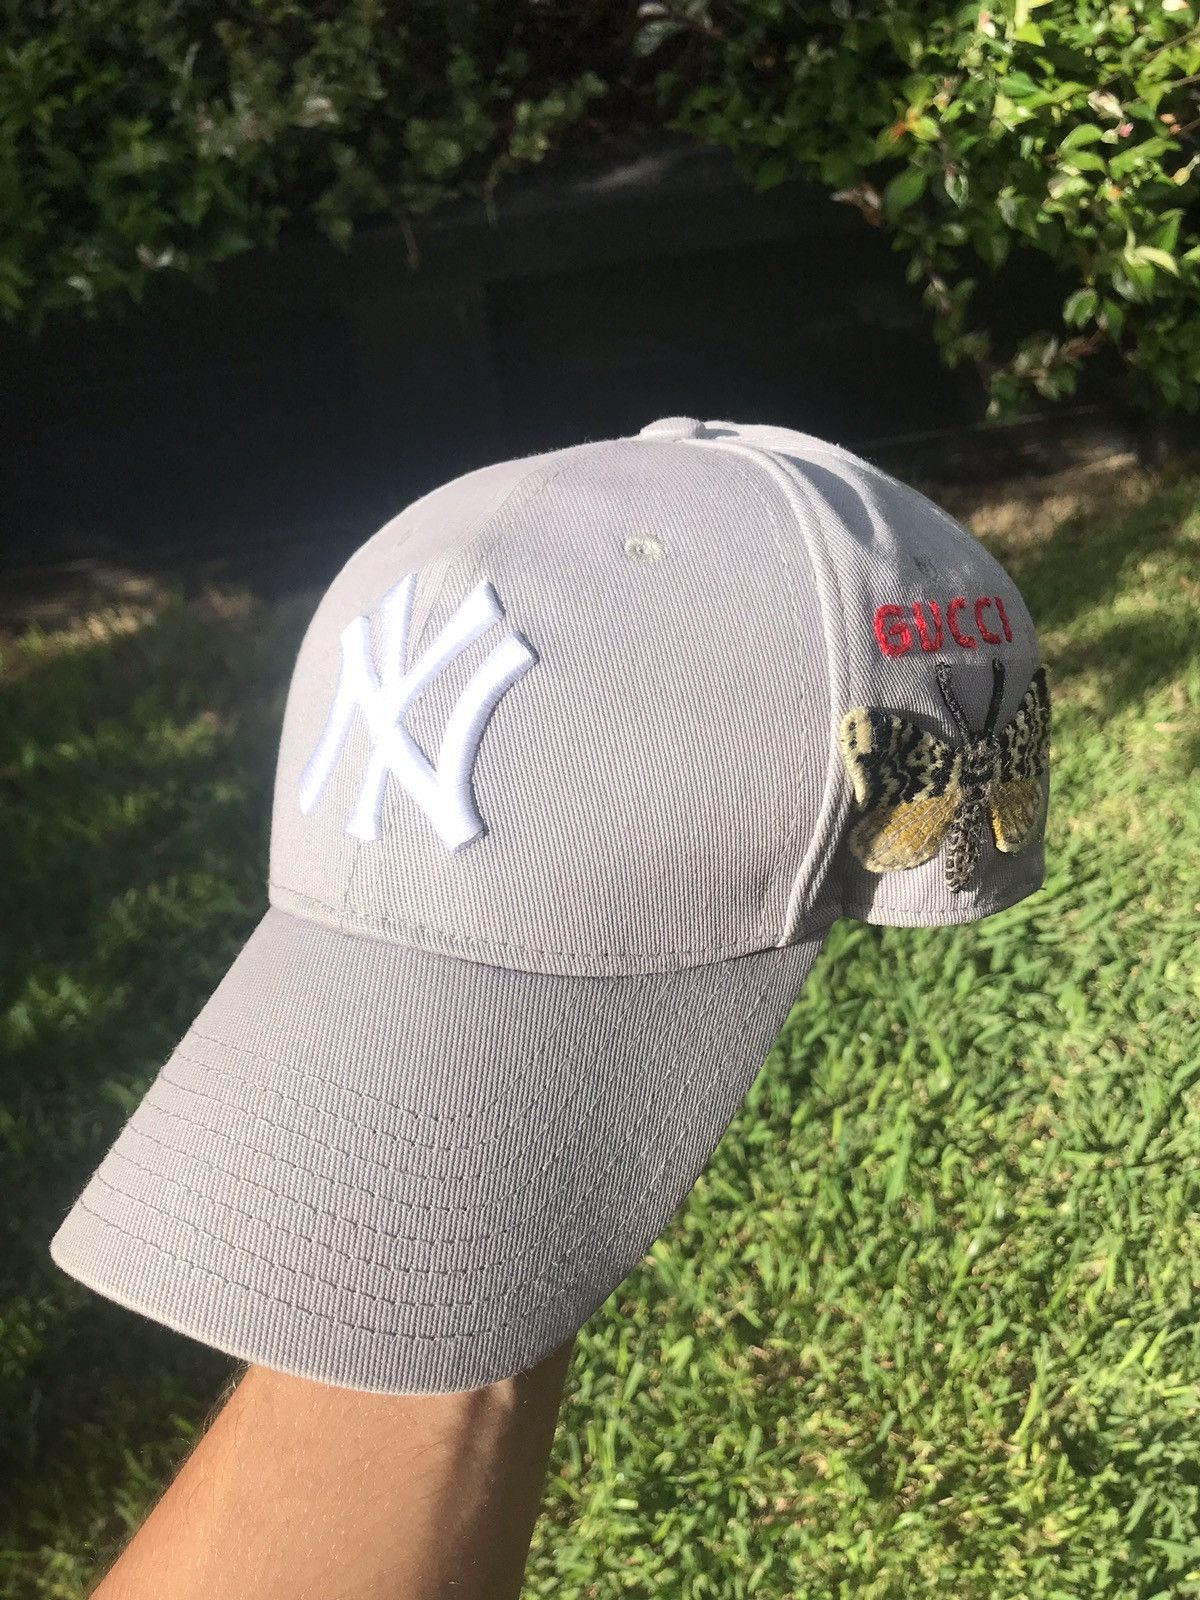 New Gucci New York Yankees Baseball Cap Butterfly Embroidery